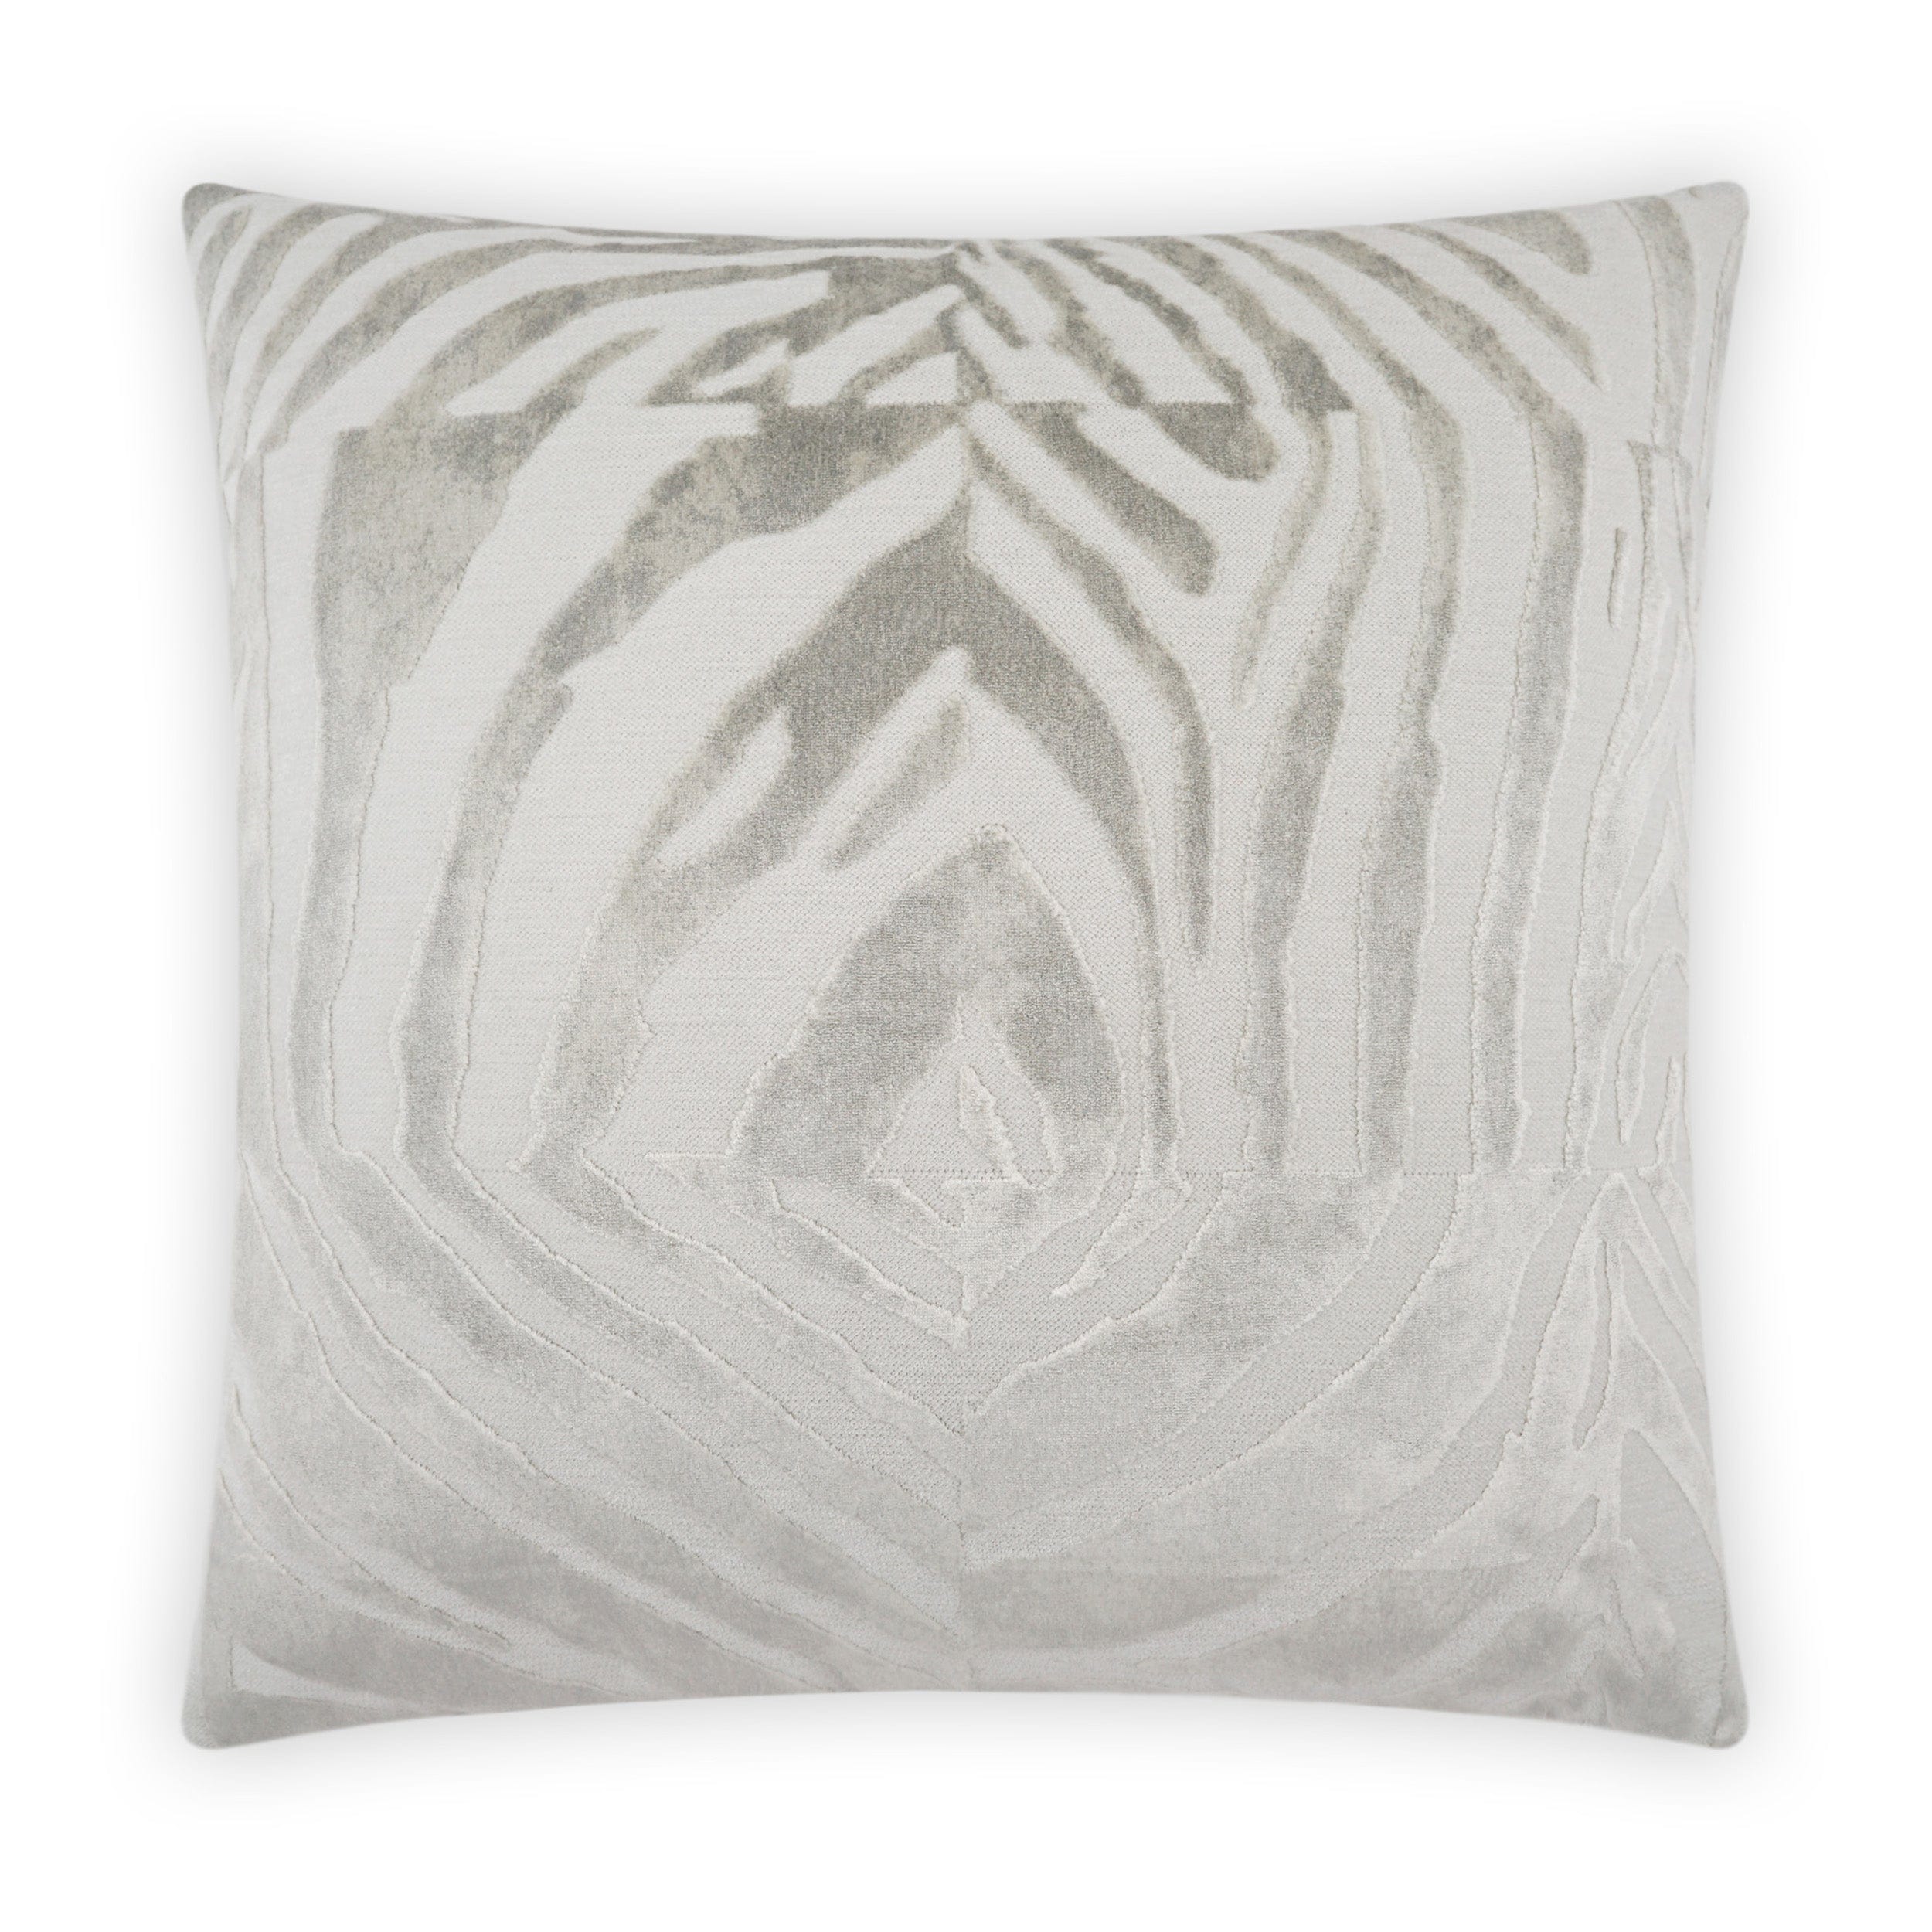 Image of Paddy Pillow, Pearl